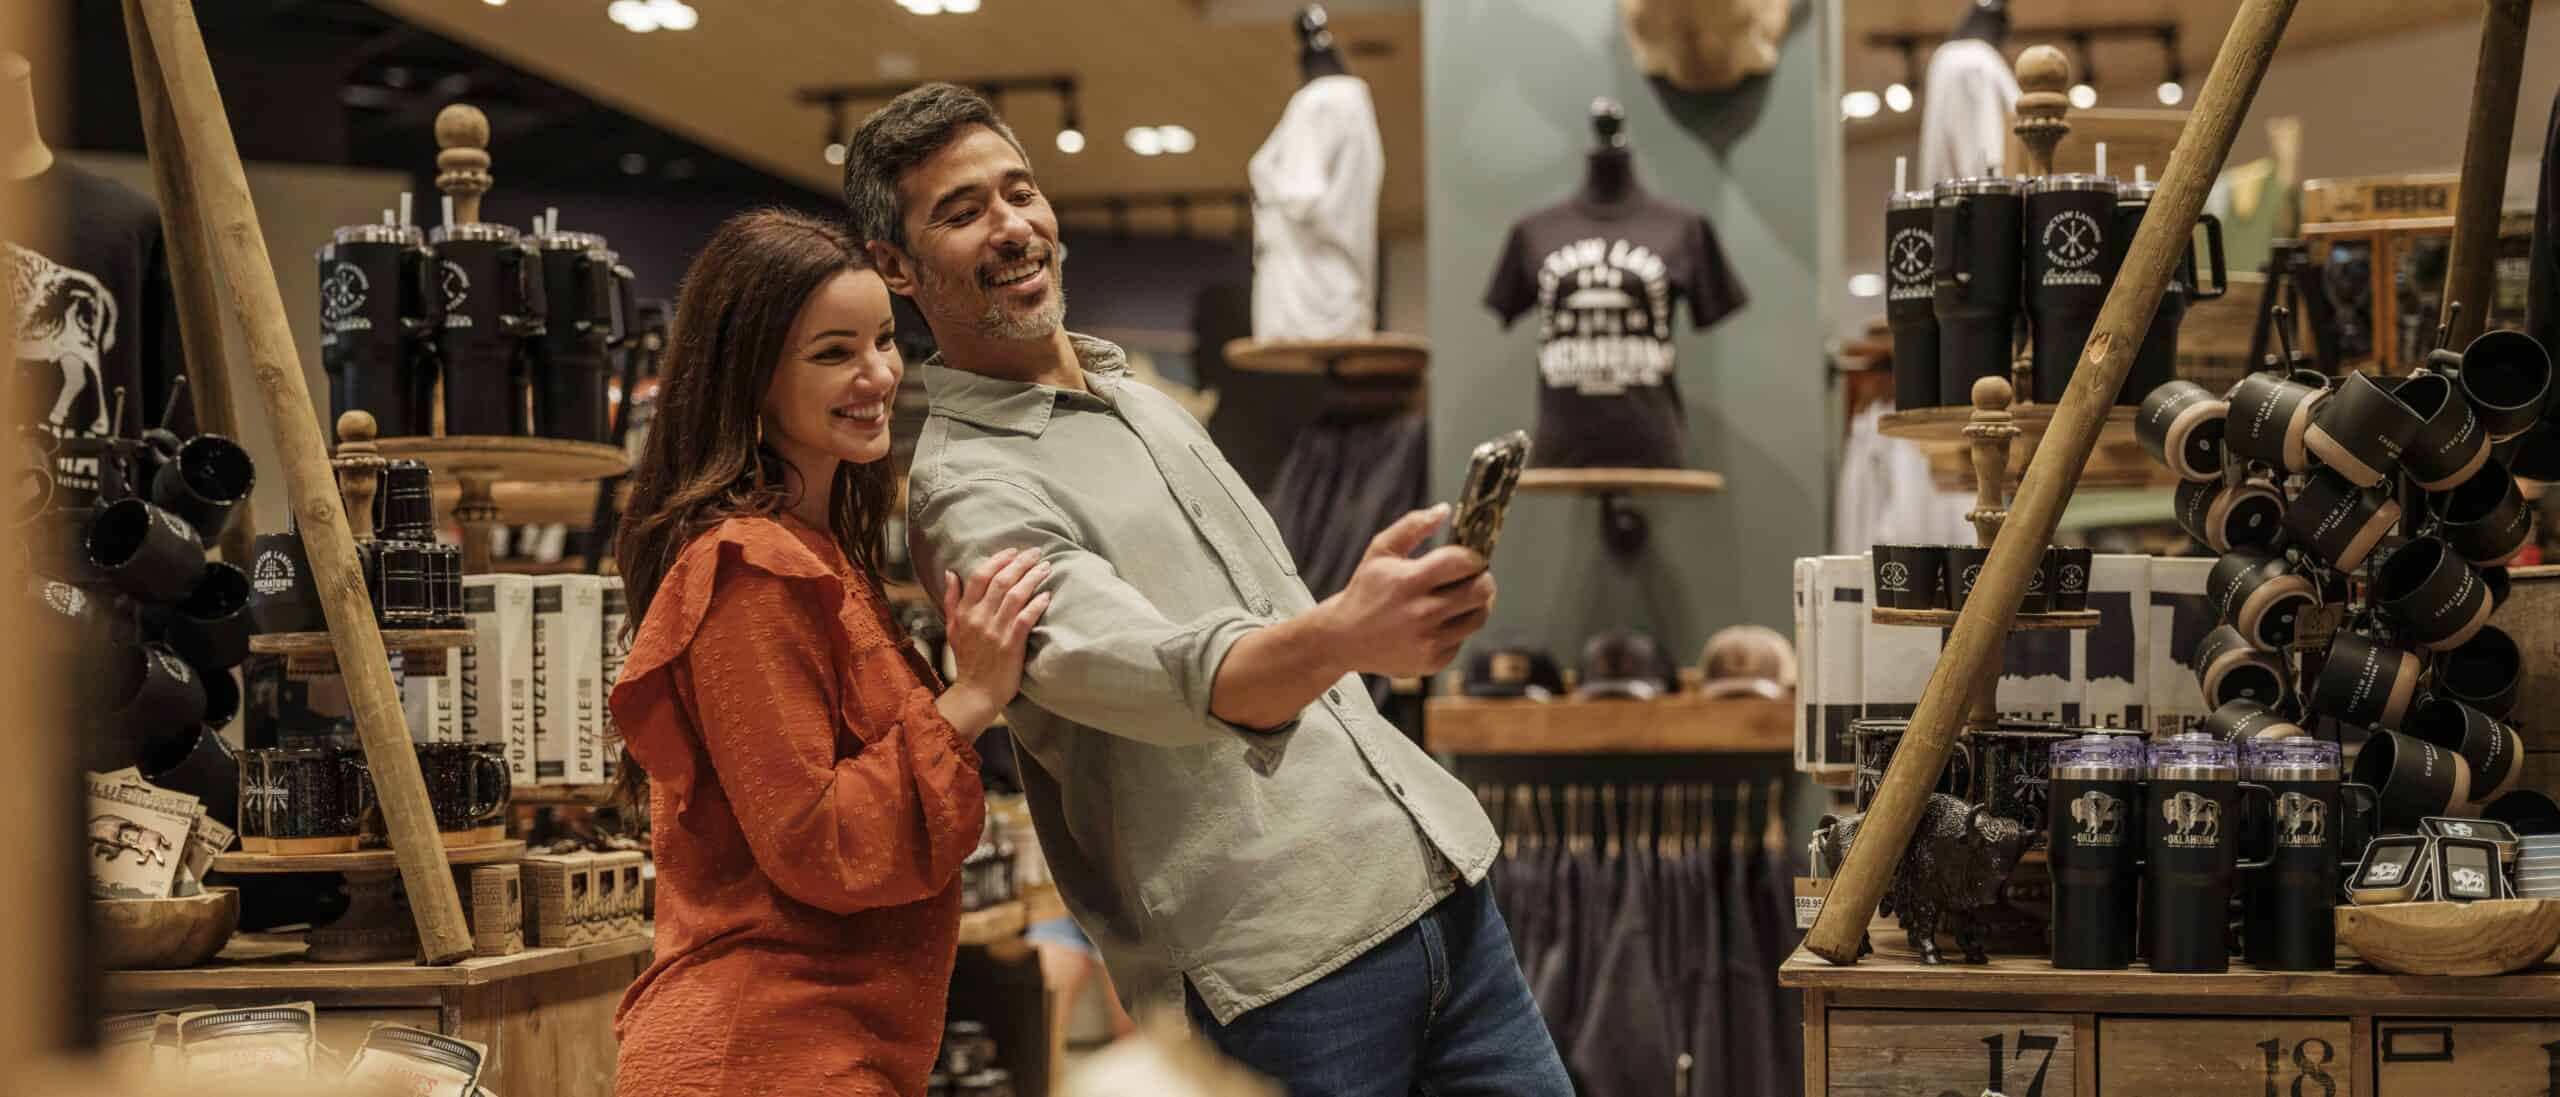 A man and woman stand in the mercantile. The man, leaning back, is showing the woman something on his phone.